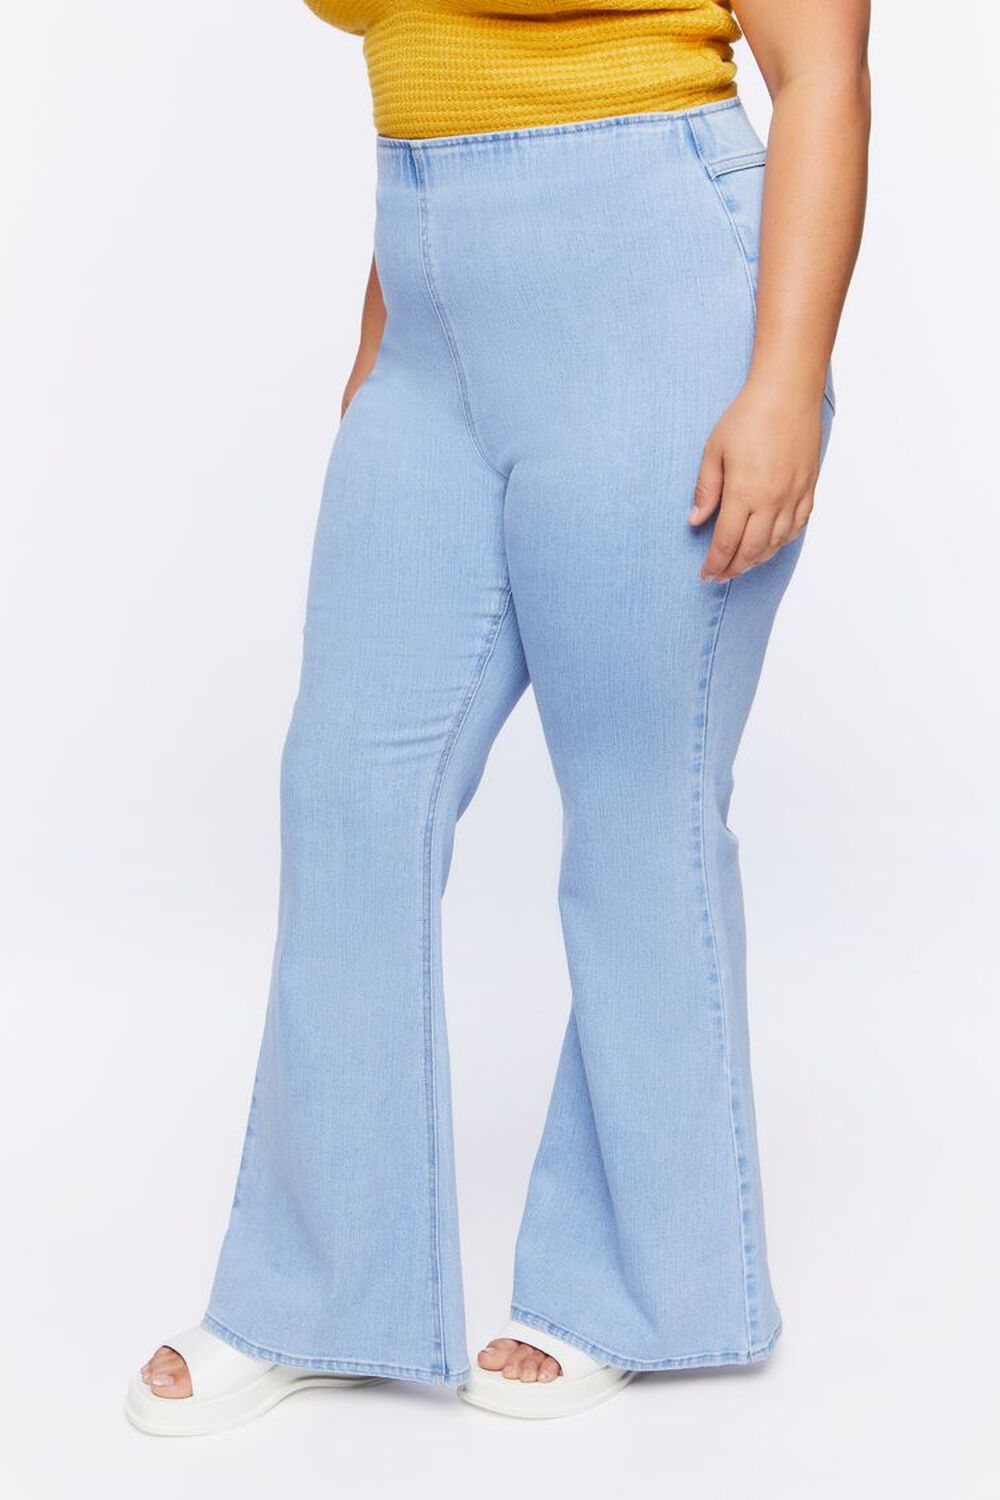 Plus Size High-Rise Flare Jeans, image 3